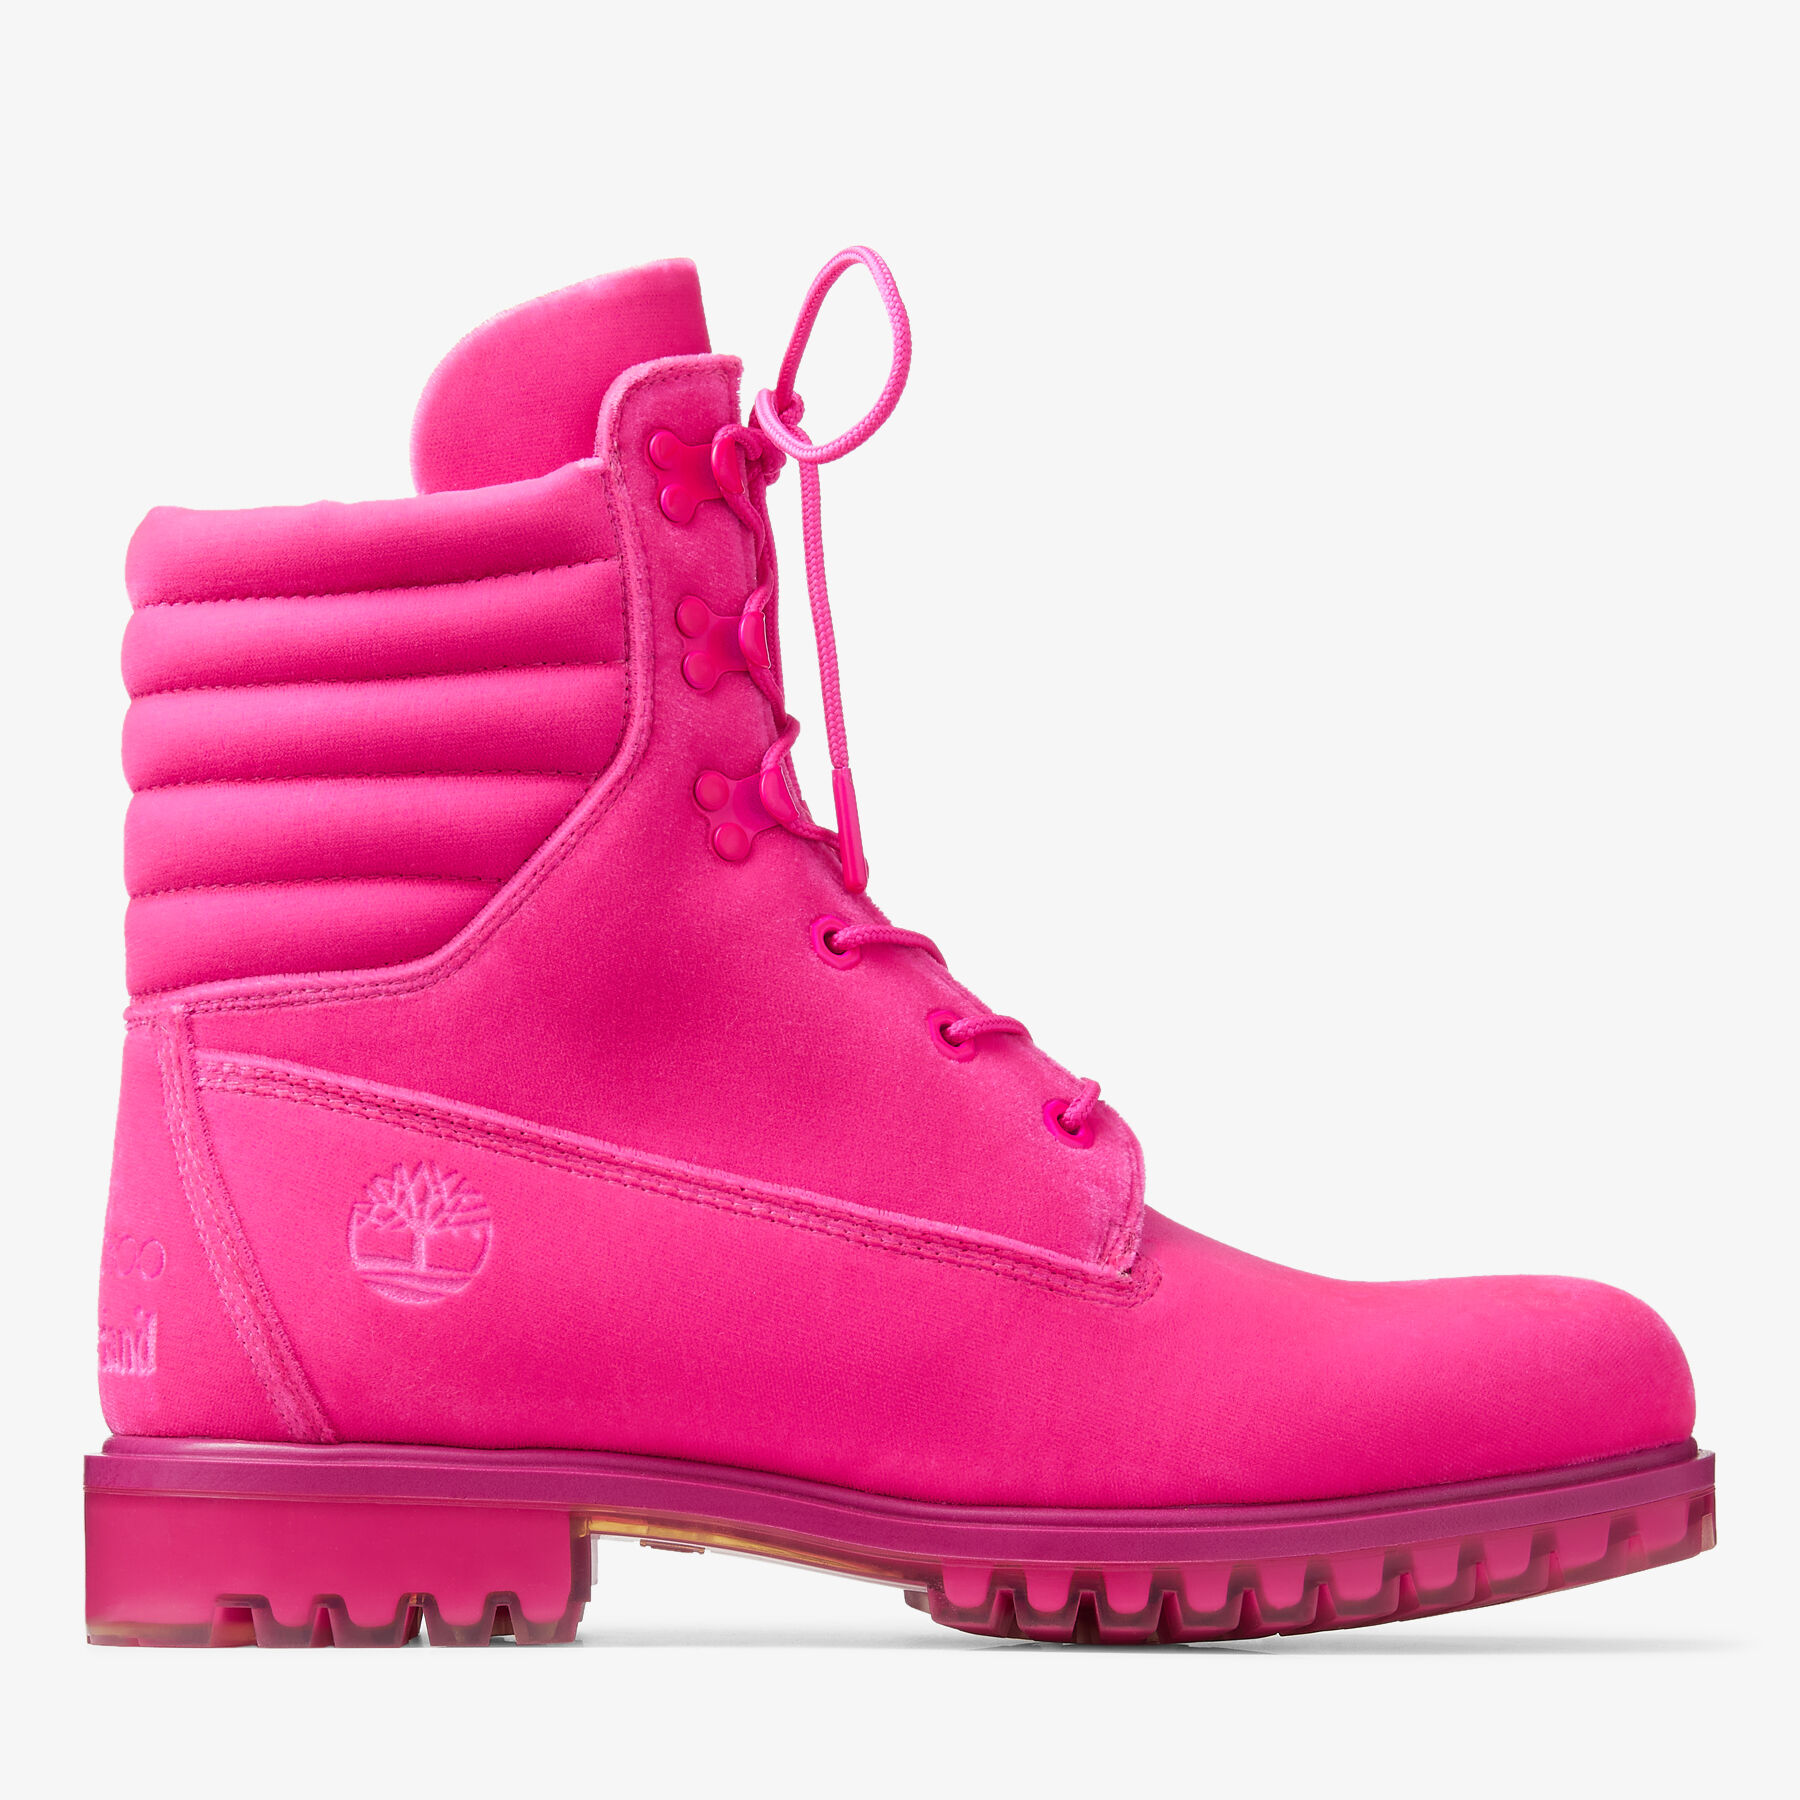 Hot Pink Timberland Velvet Ankle Boots | JIMMY CHOO X TIMBERLAND 8 INCH  PUFFER BOOT | Jimmy Choo x Timberland Collection | JIMMY CHOO